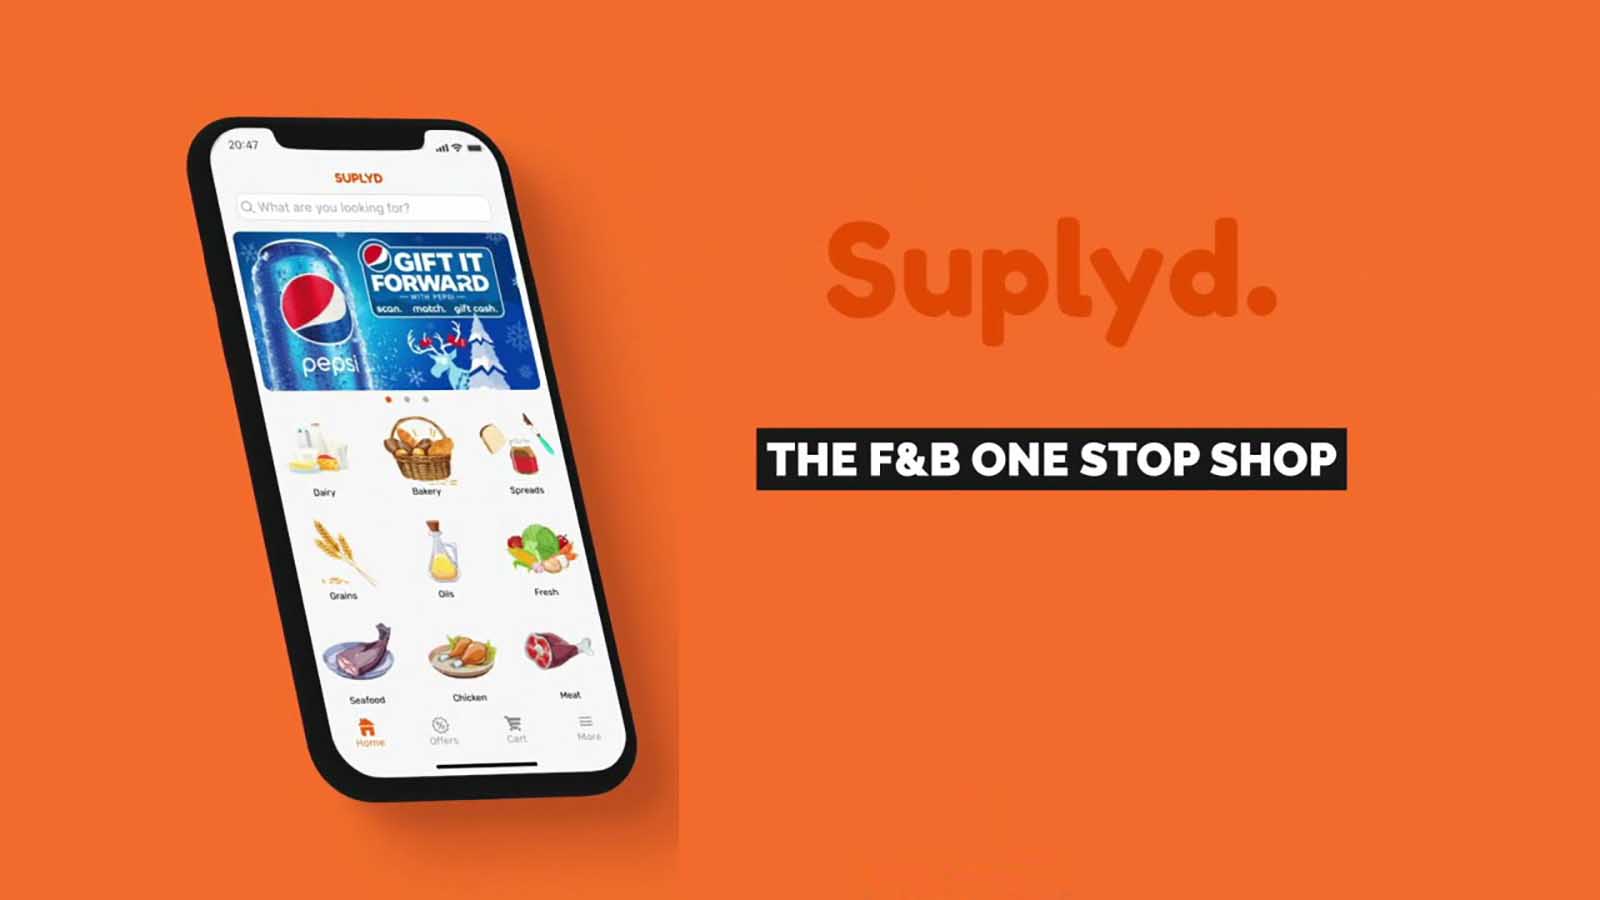 <strong>Food service management startup Suplyd raises US$1.6m, Appetito merges with Jumlaty</strong>